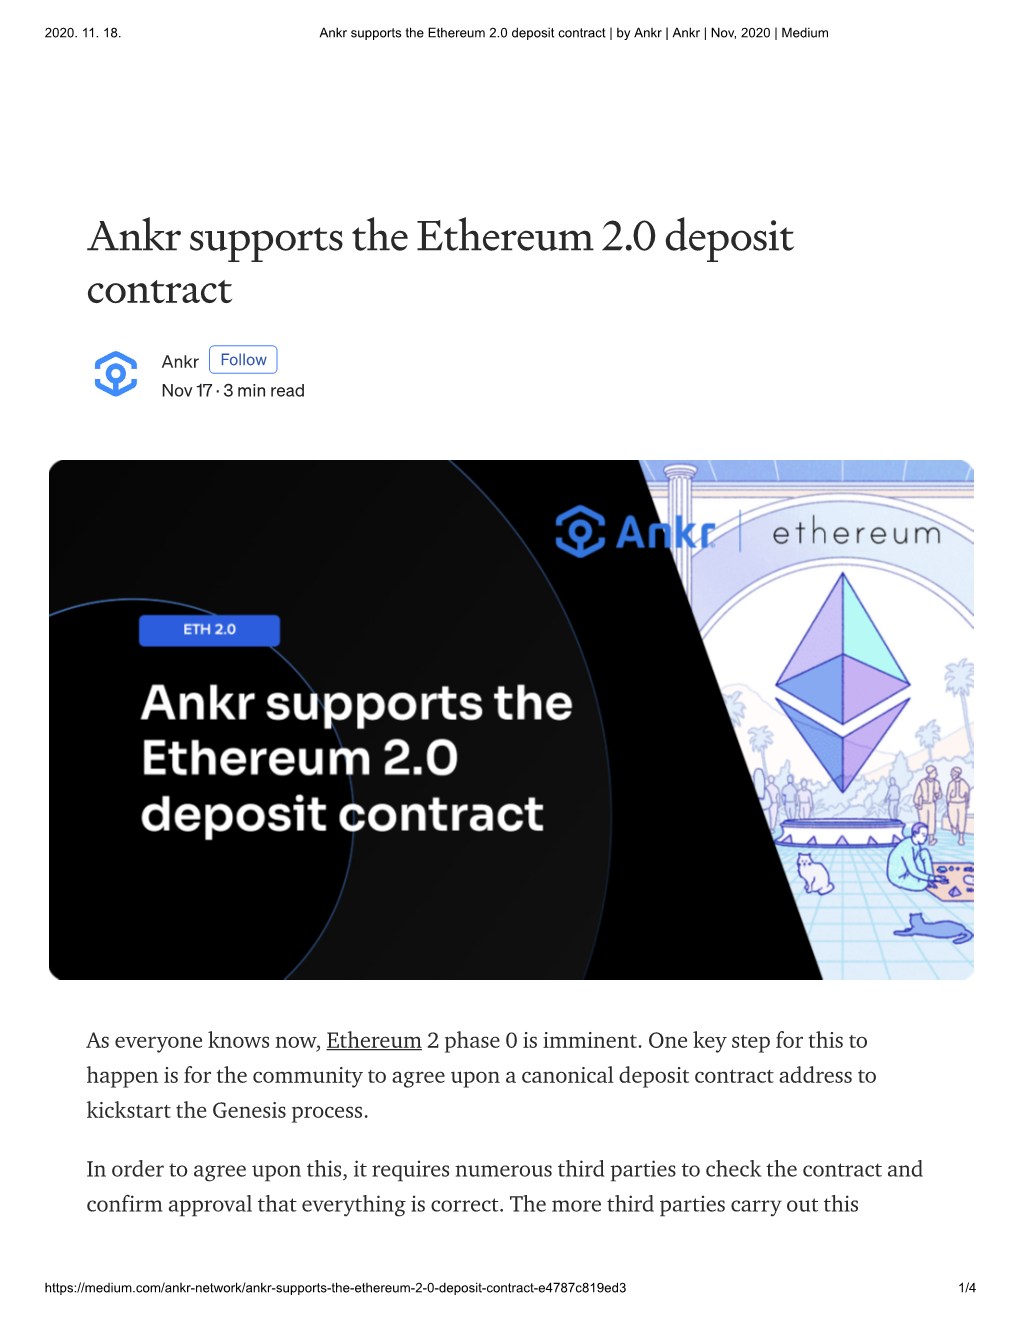 Ankr Supports the Ethereum 2.0 Deposit Contract | by Ankr | Ankr | Nov, 2020 | Medium